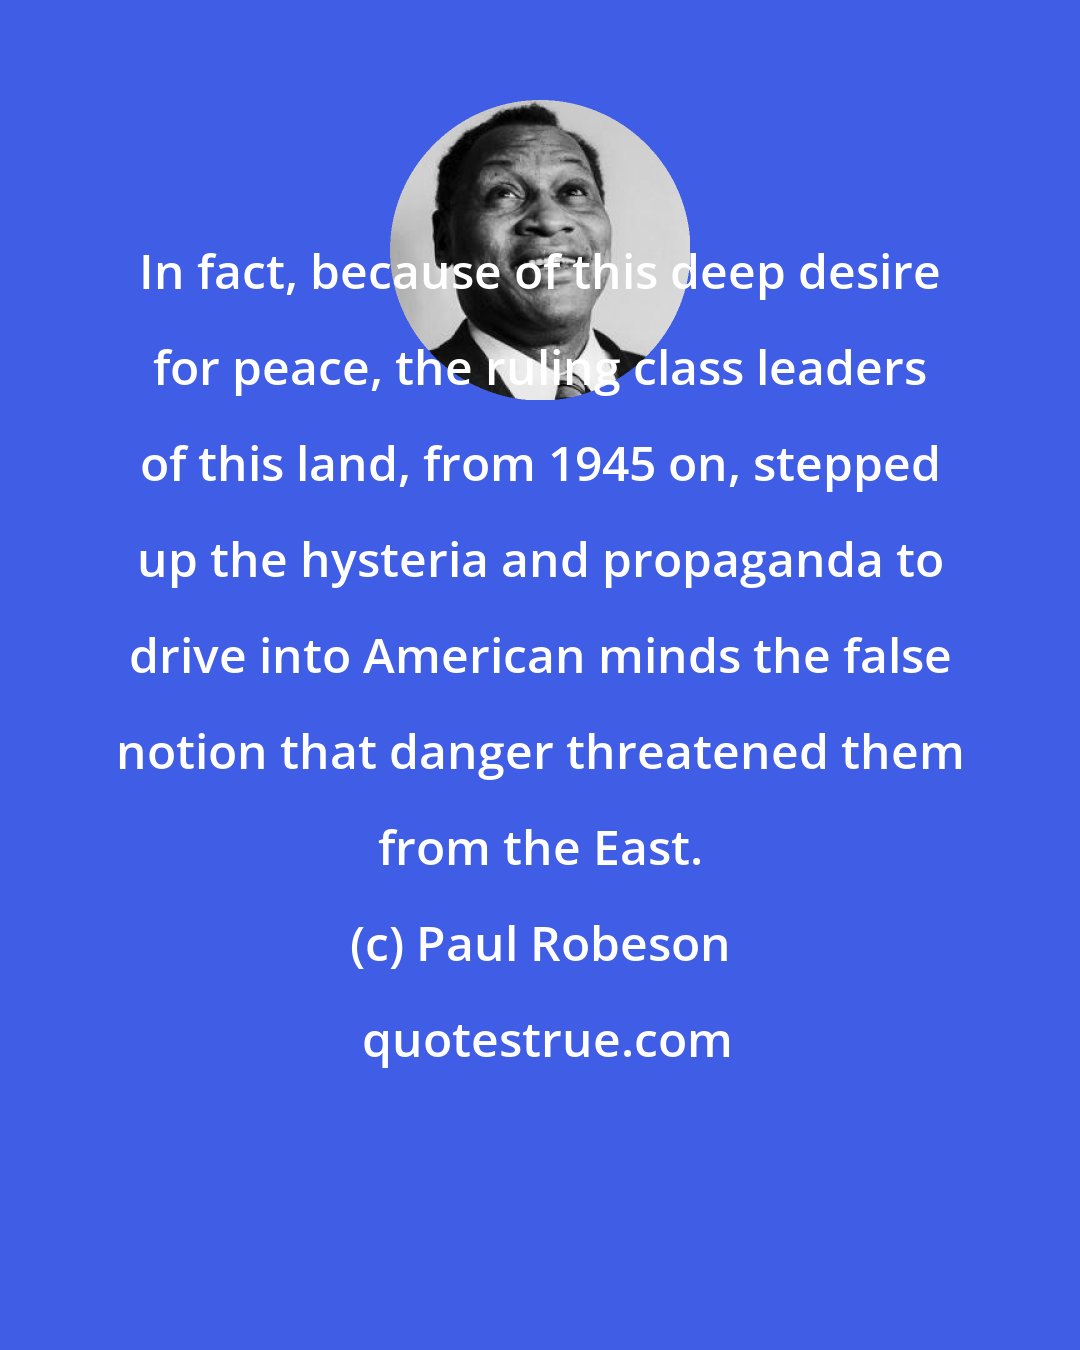 Paul Robeson: In fact, because of this deep desire for peace, the ruling class leaders of this land, from 1945 on, stepped up the hysteria and propaganda to drive into American minds the false notion that danger threatened them from the East.